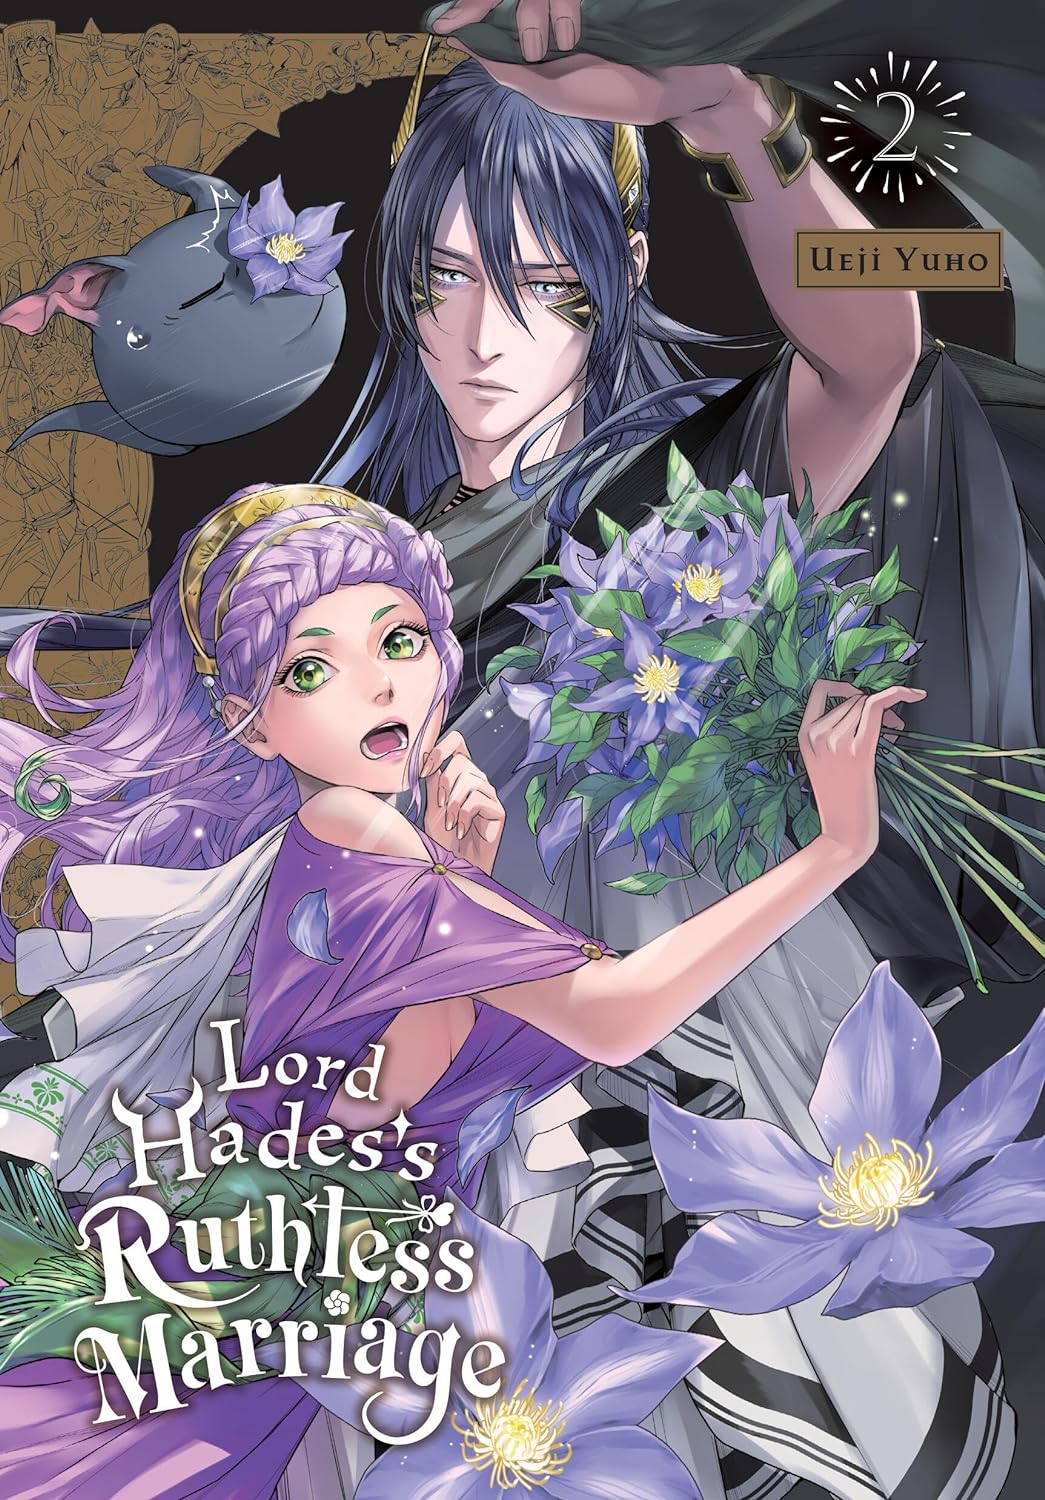 Lord Hades's Ruthless Marriage Vol. 02